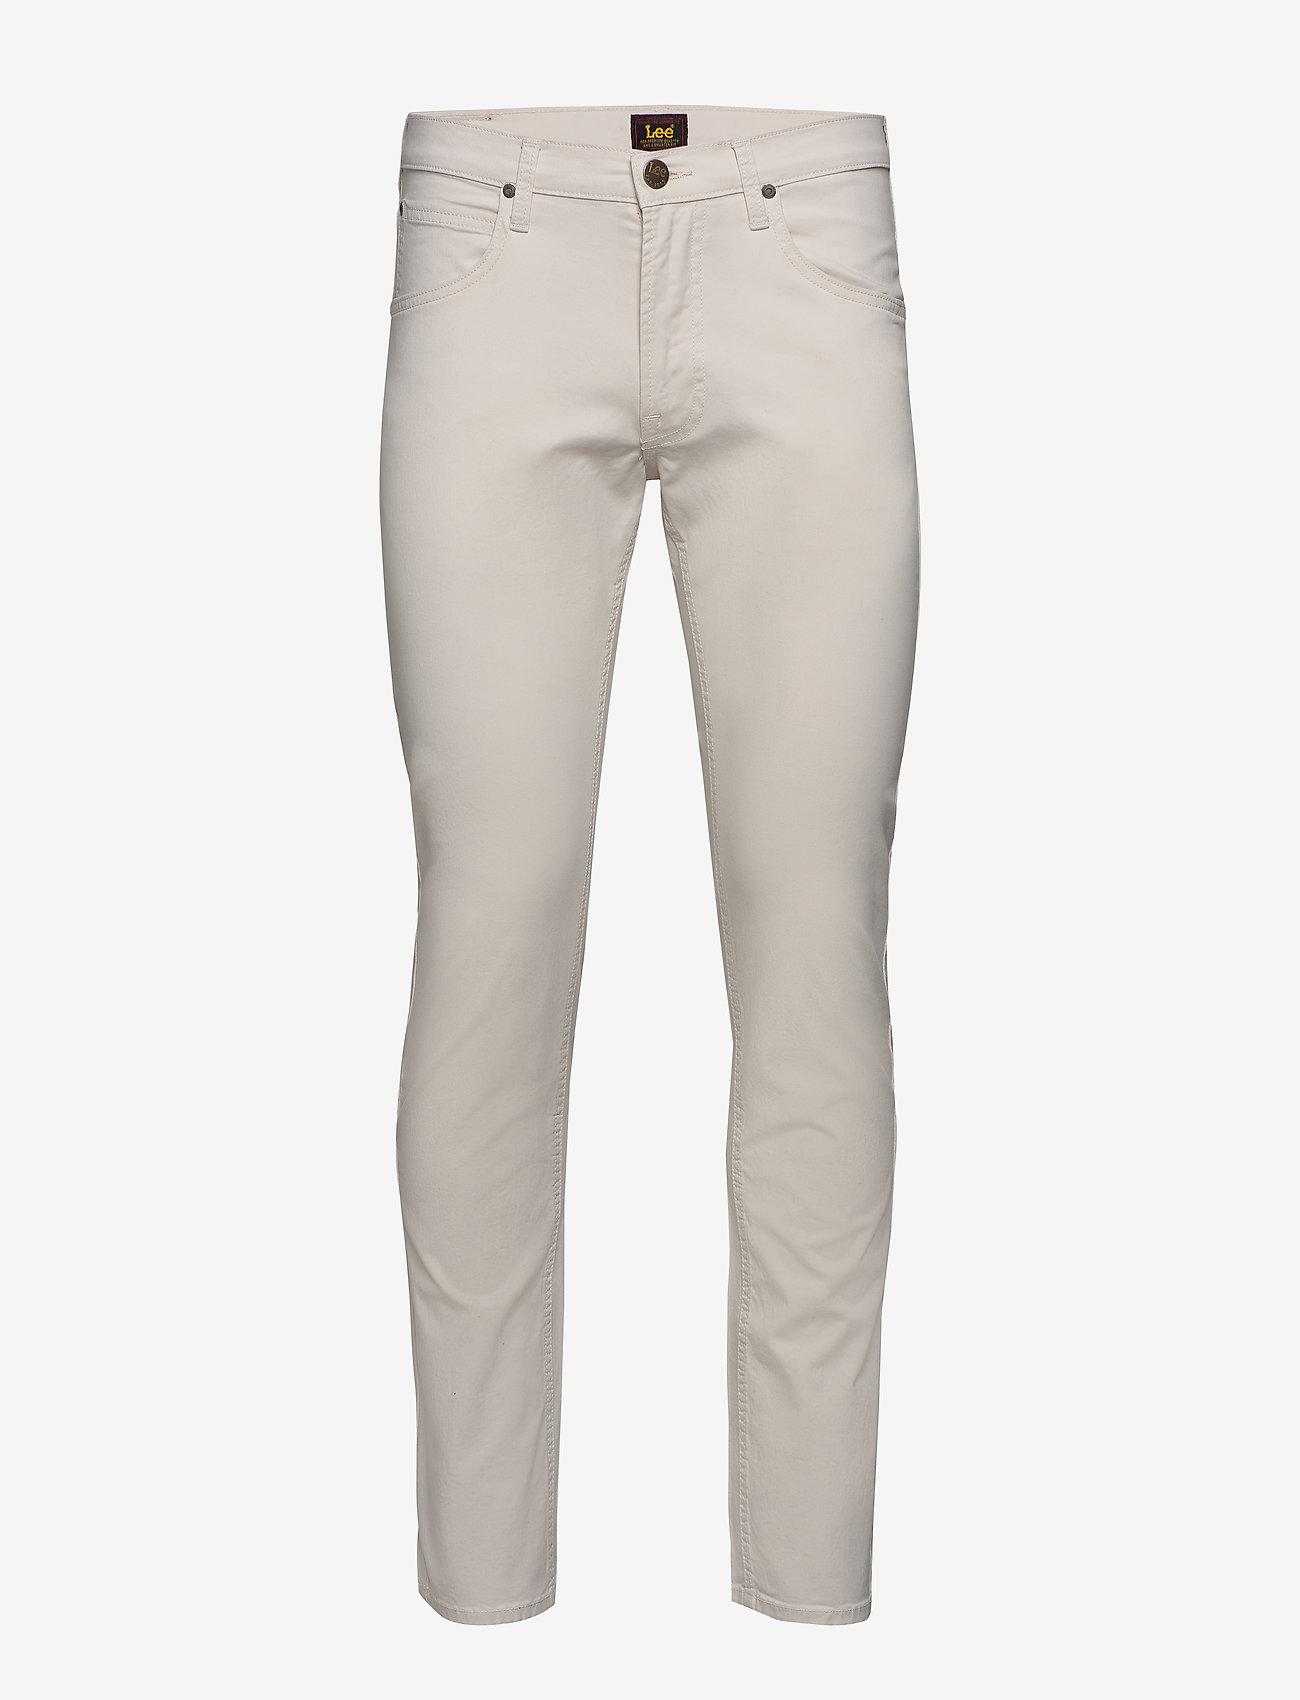 lee jeans white